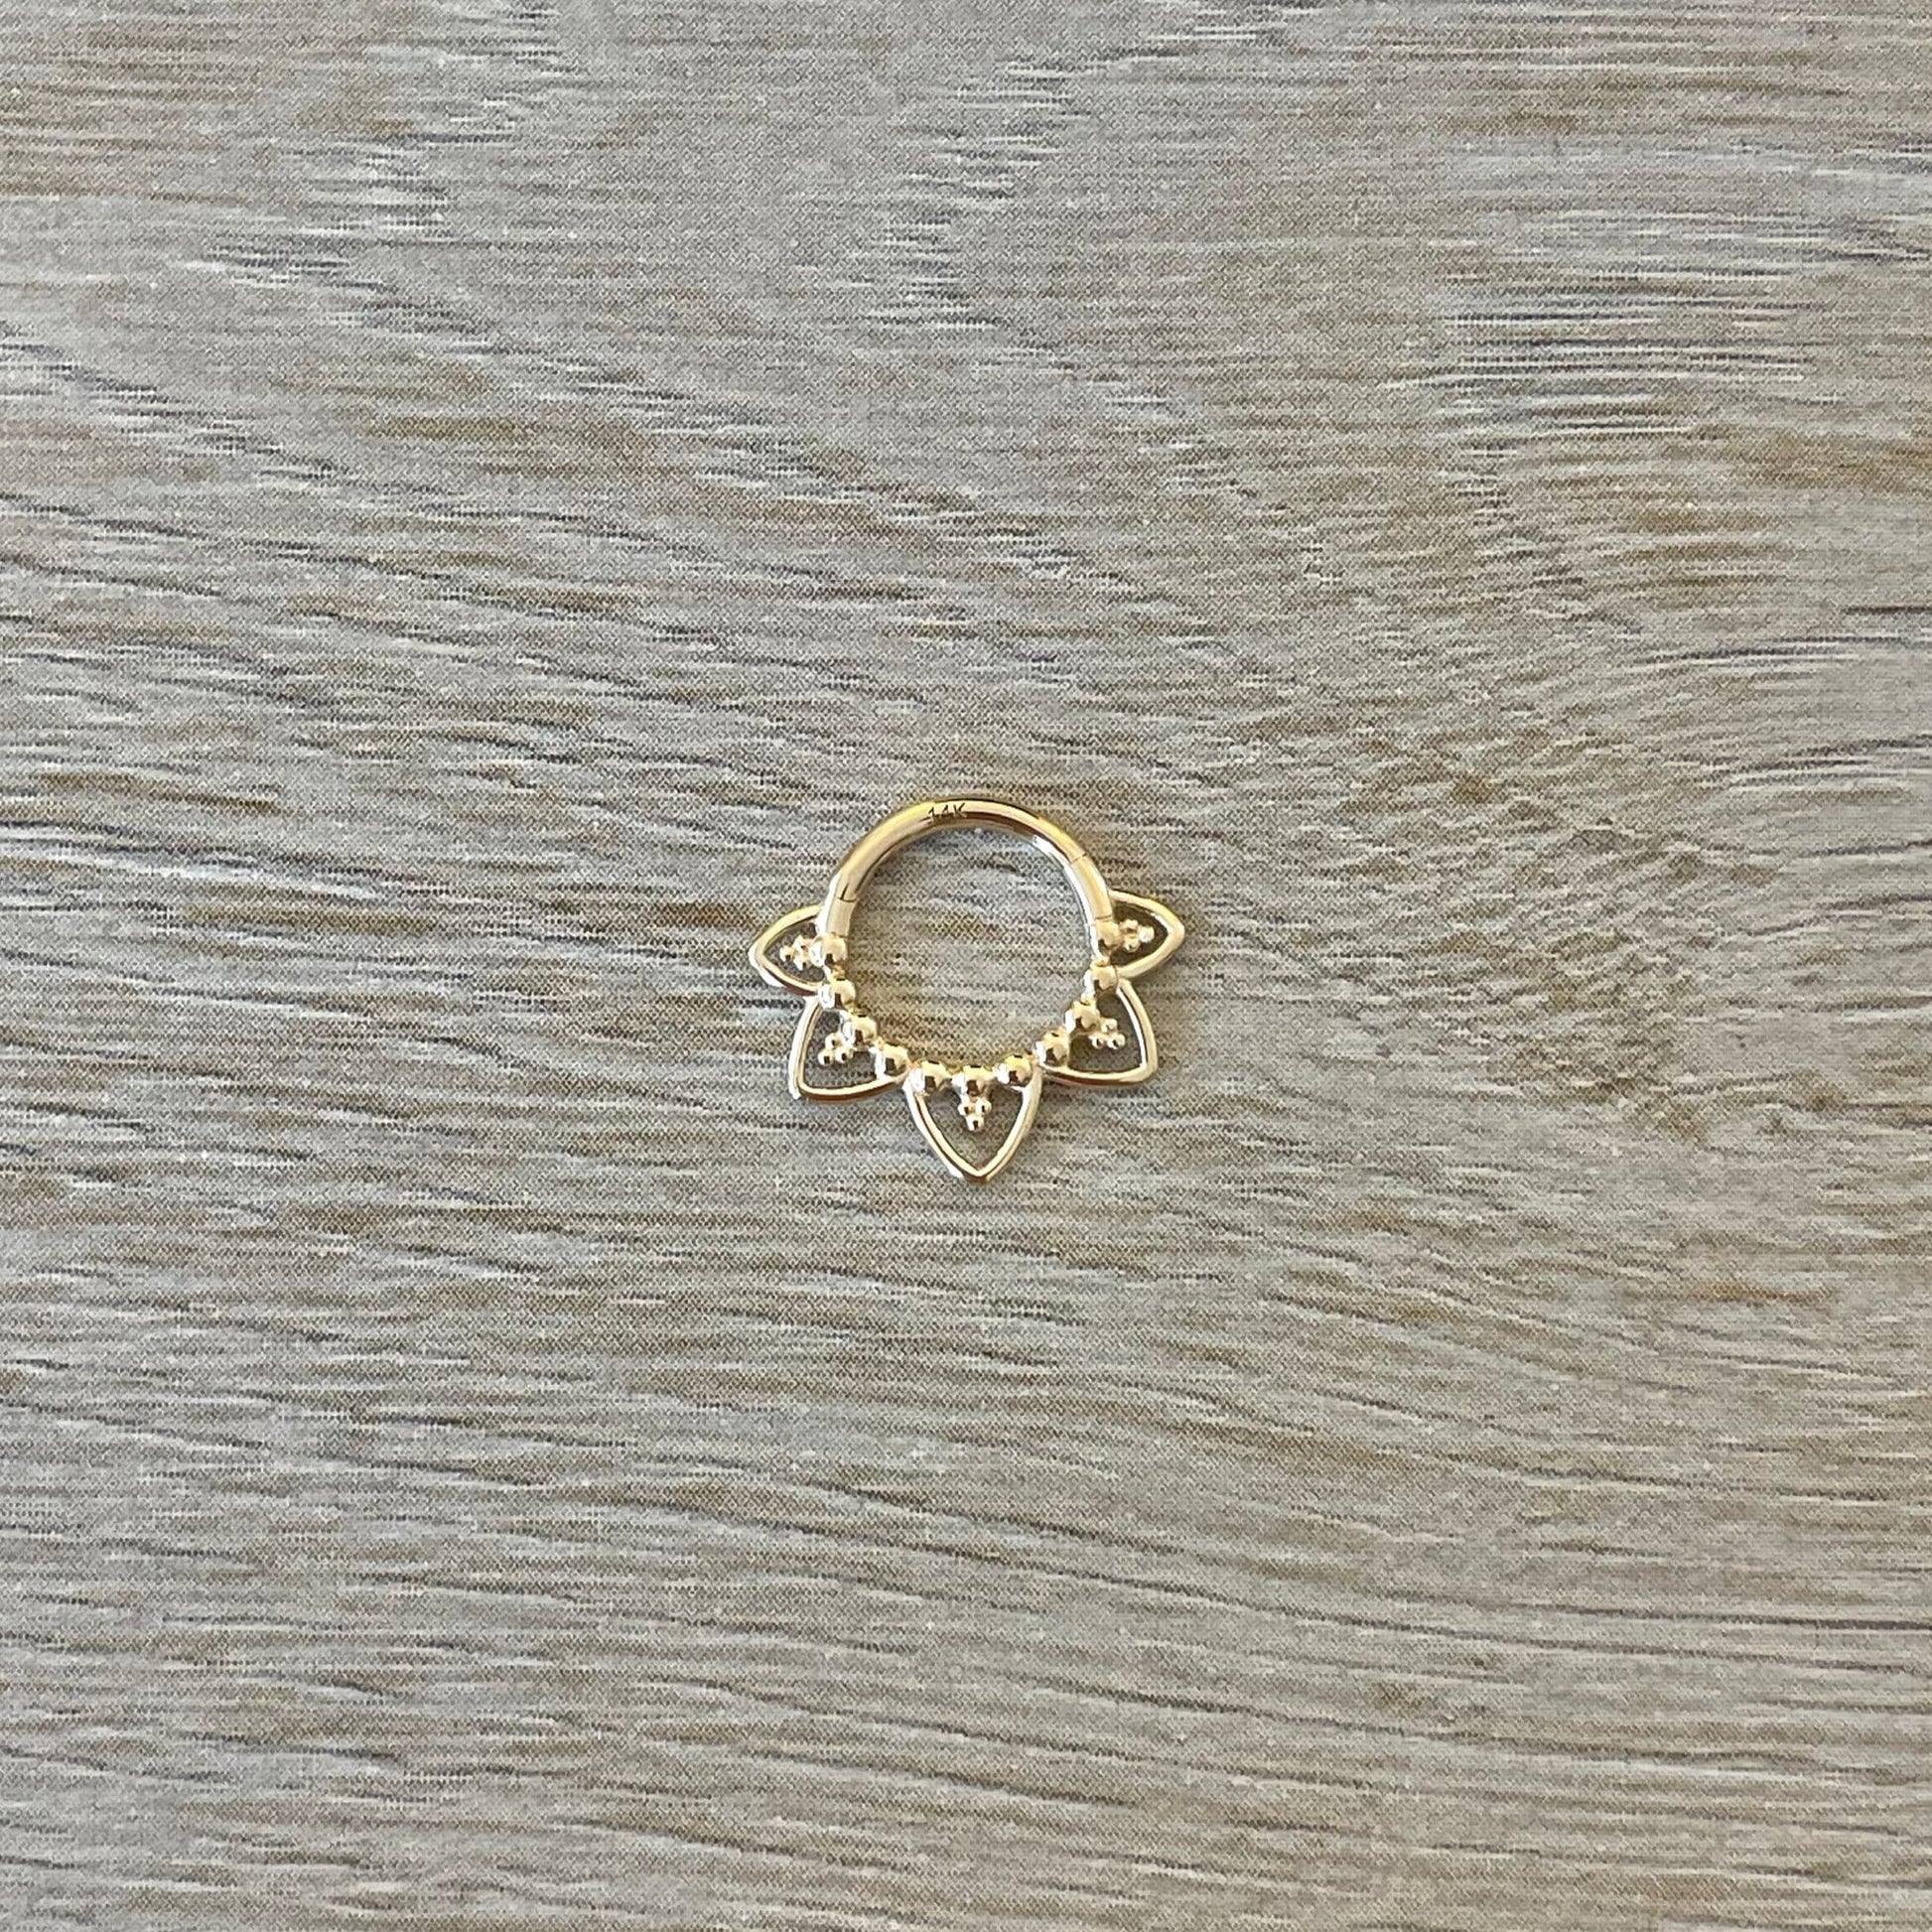 Solid White Gold Septum Jewelry Piercing (16G, 8mm, 14k Solid White or Yellow Gold)